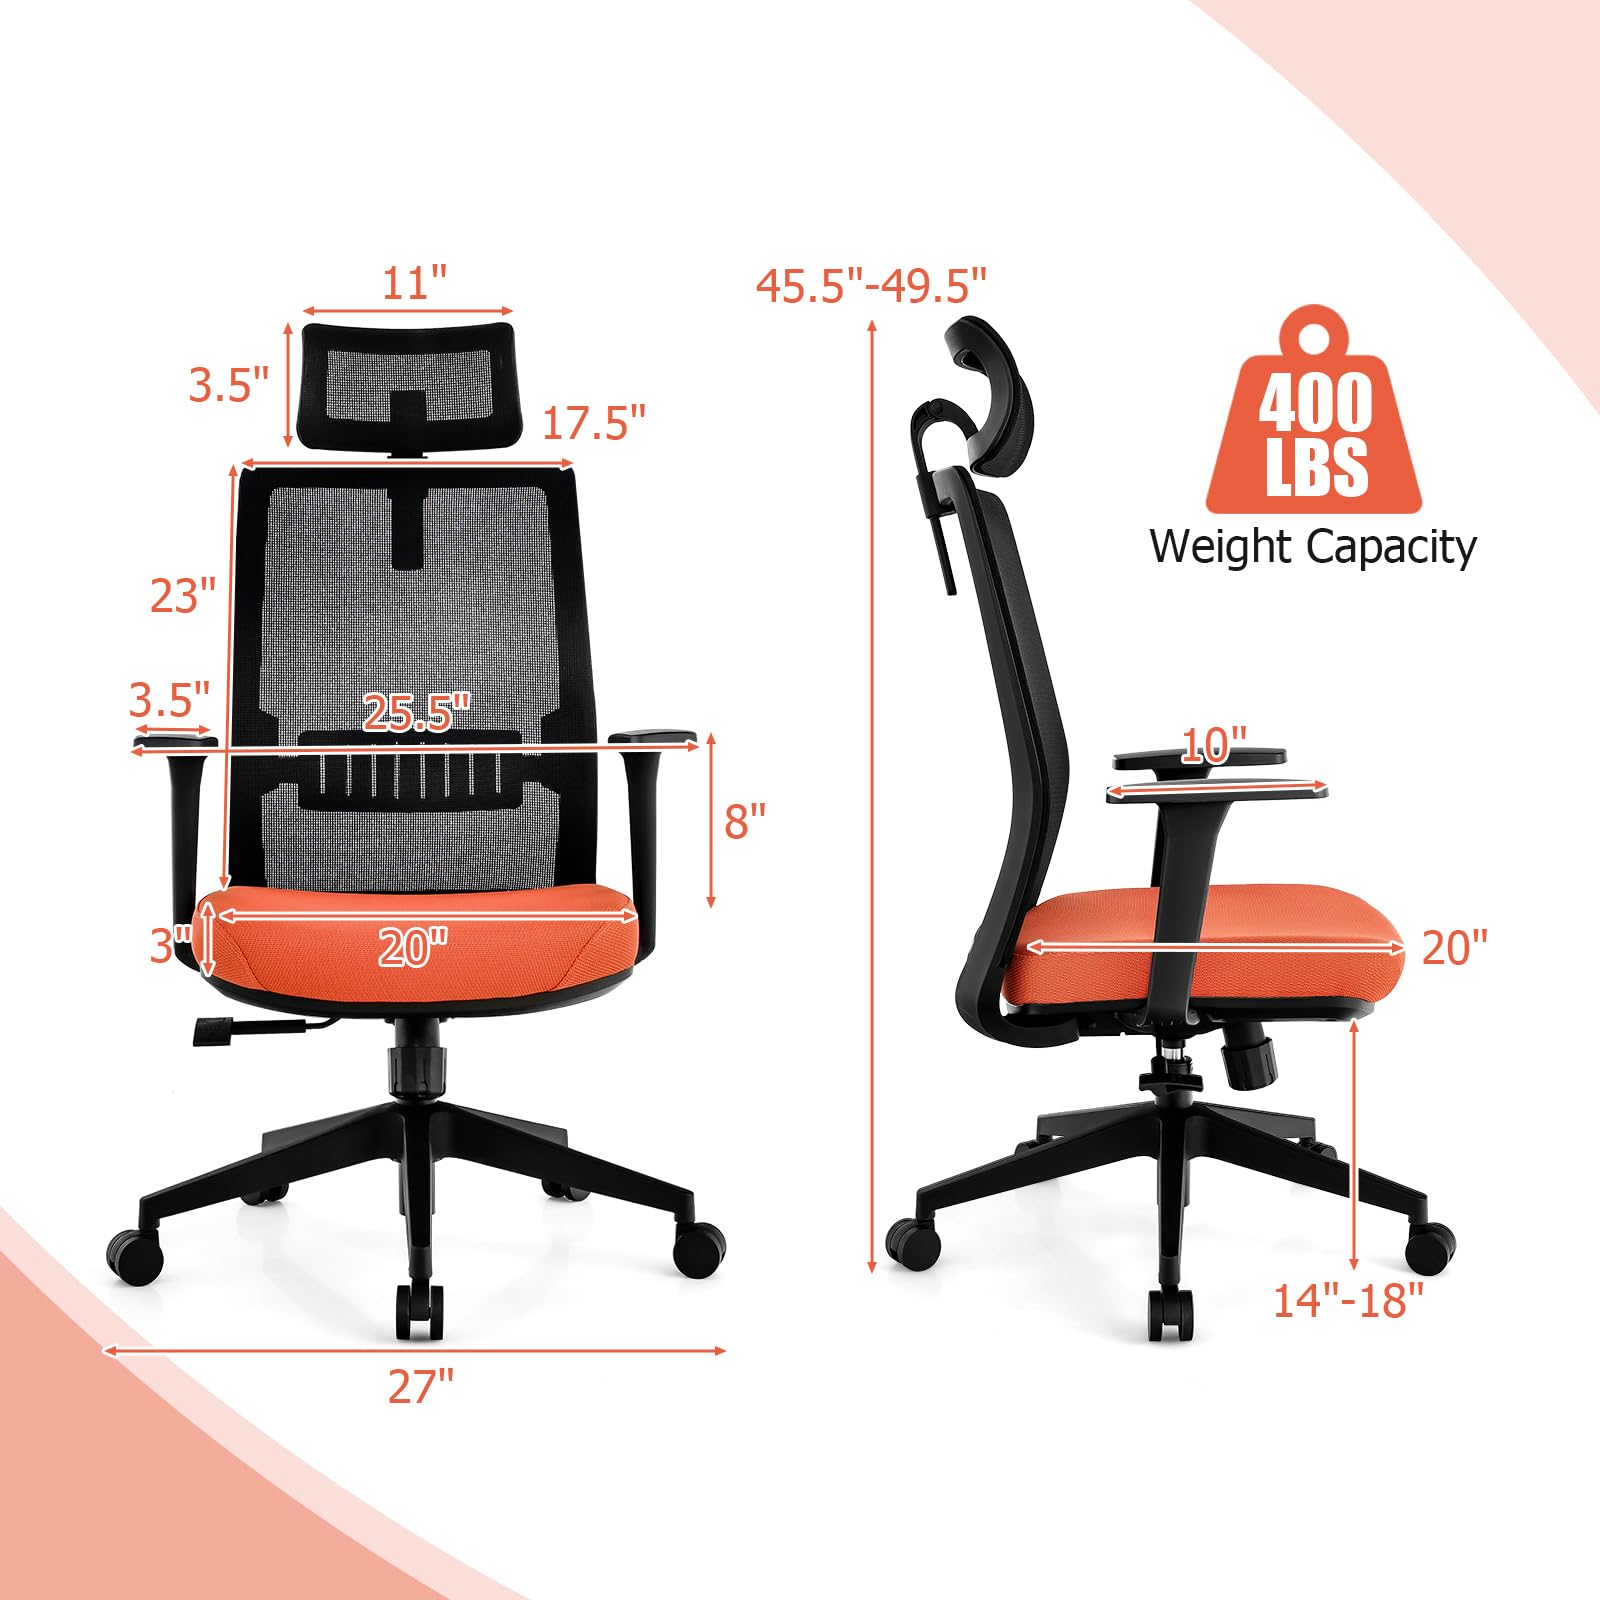 Giantex Big and Tall Office Chair 400lbs, Heavy Duty Ergonomic Mesh Chair with Adjustable Lumbar and 3D Headrest